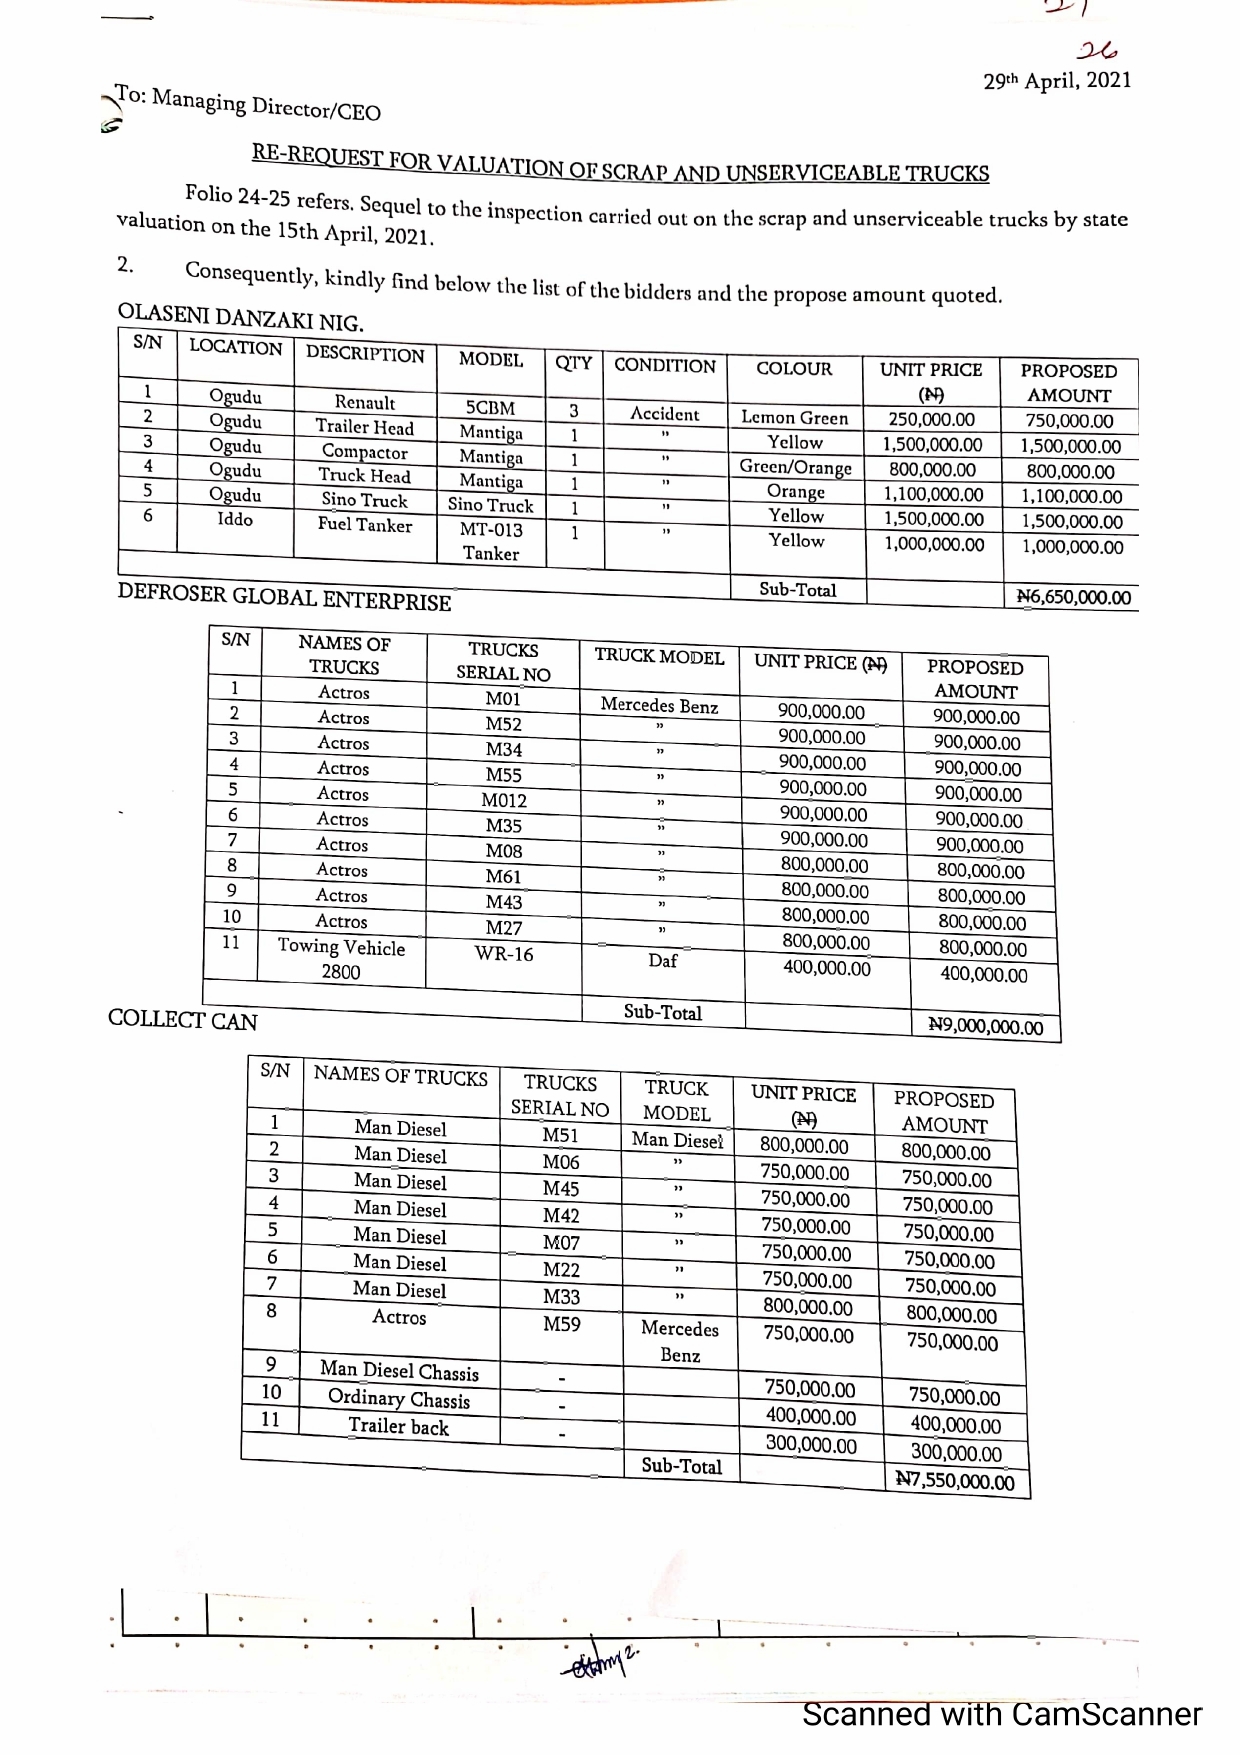 List of Vehicles and Valuation.